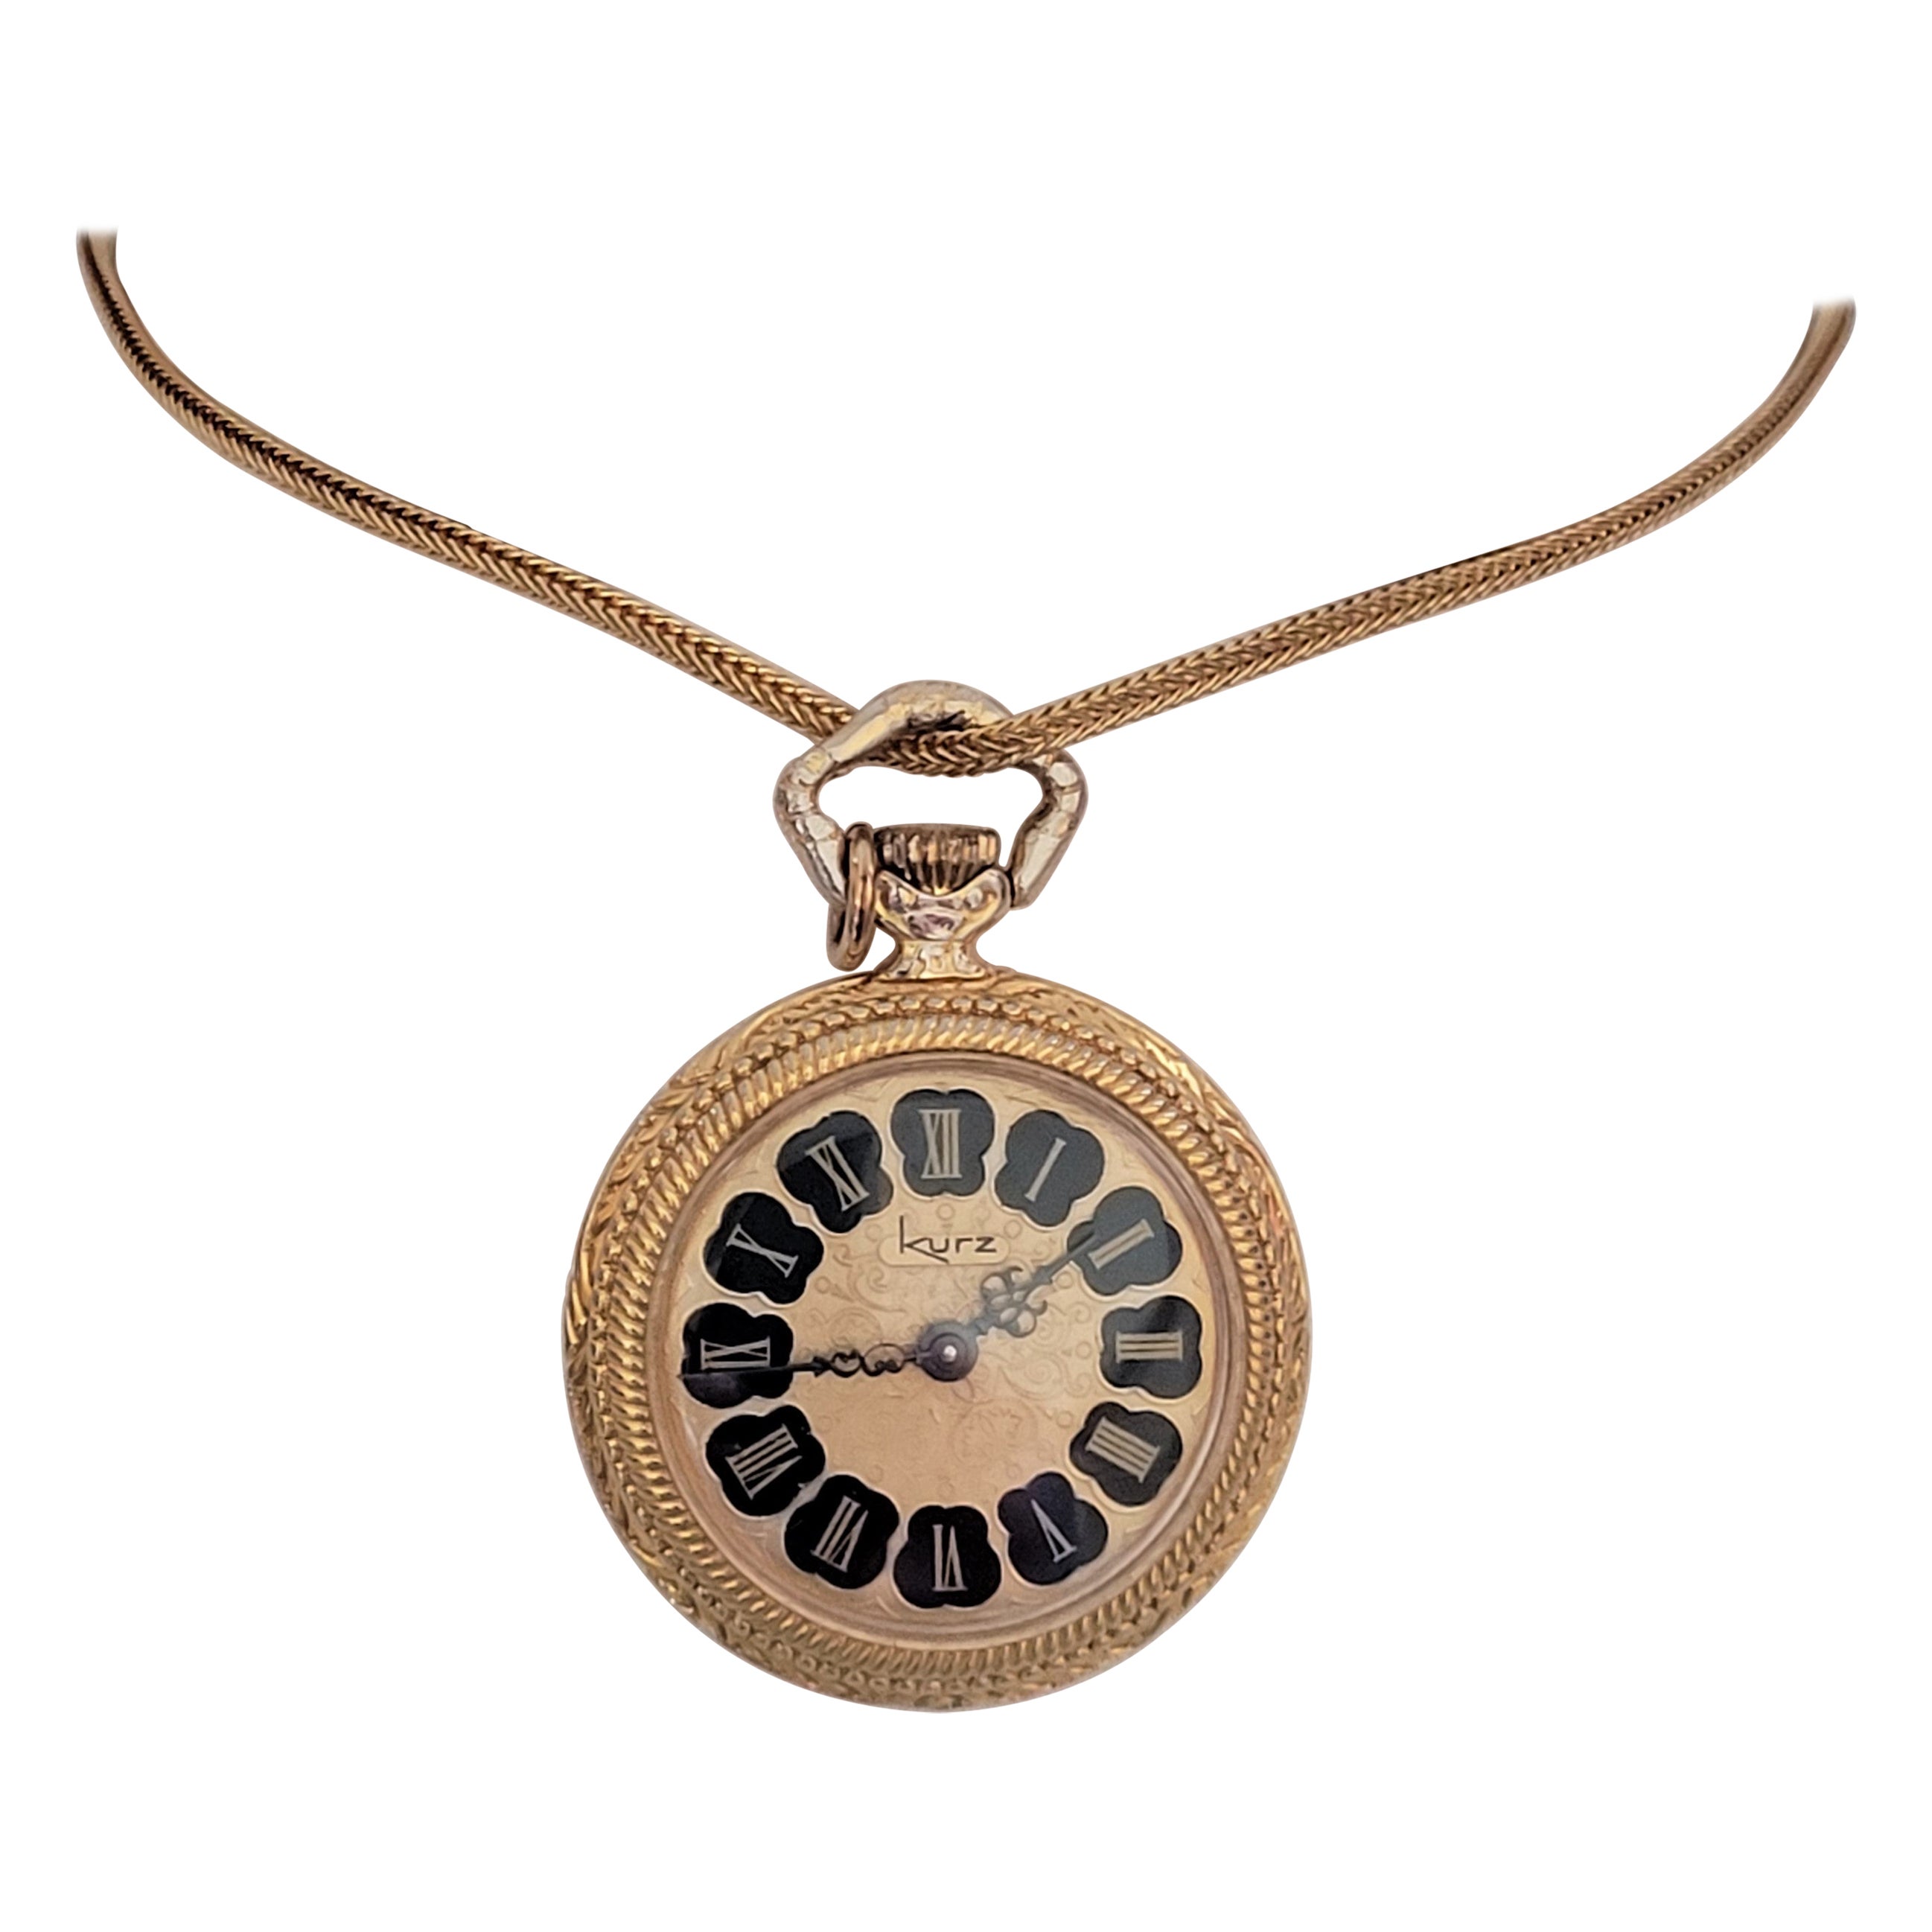 Gold Plated Kurz Armin Pendant Watch, Original Box, Very Good Working Condition For Sale